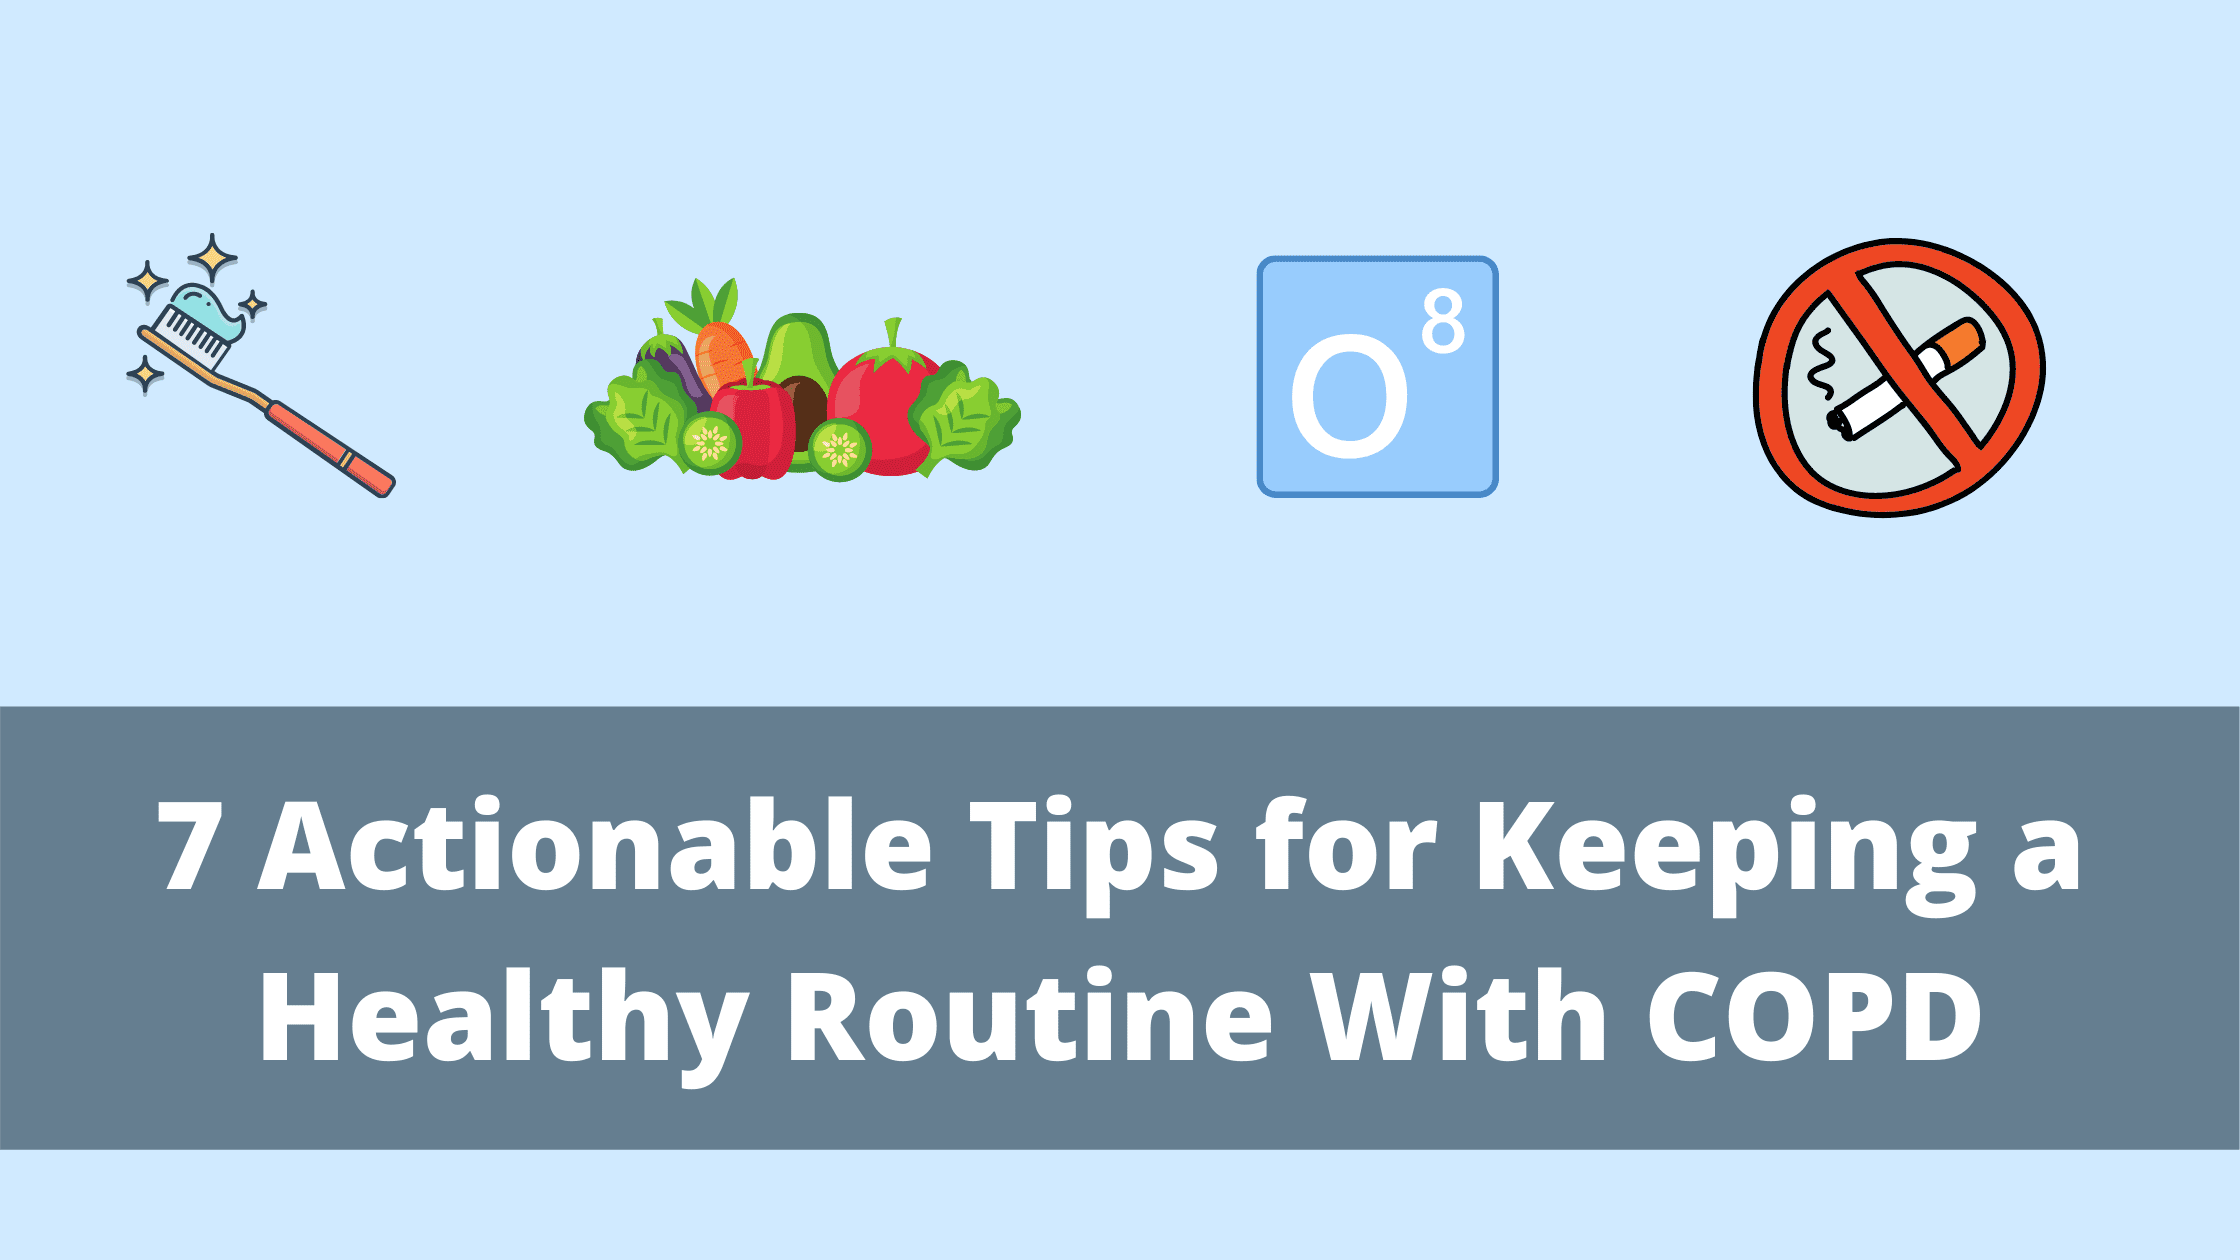 7 Actionable Tips for Keeping a Healthy Routine With COPD